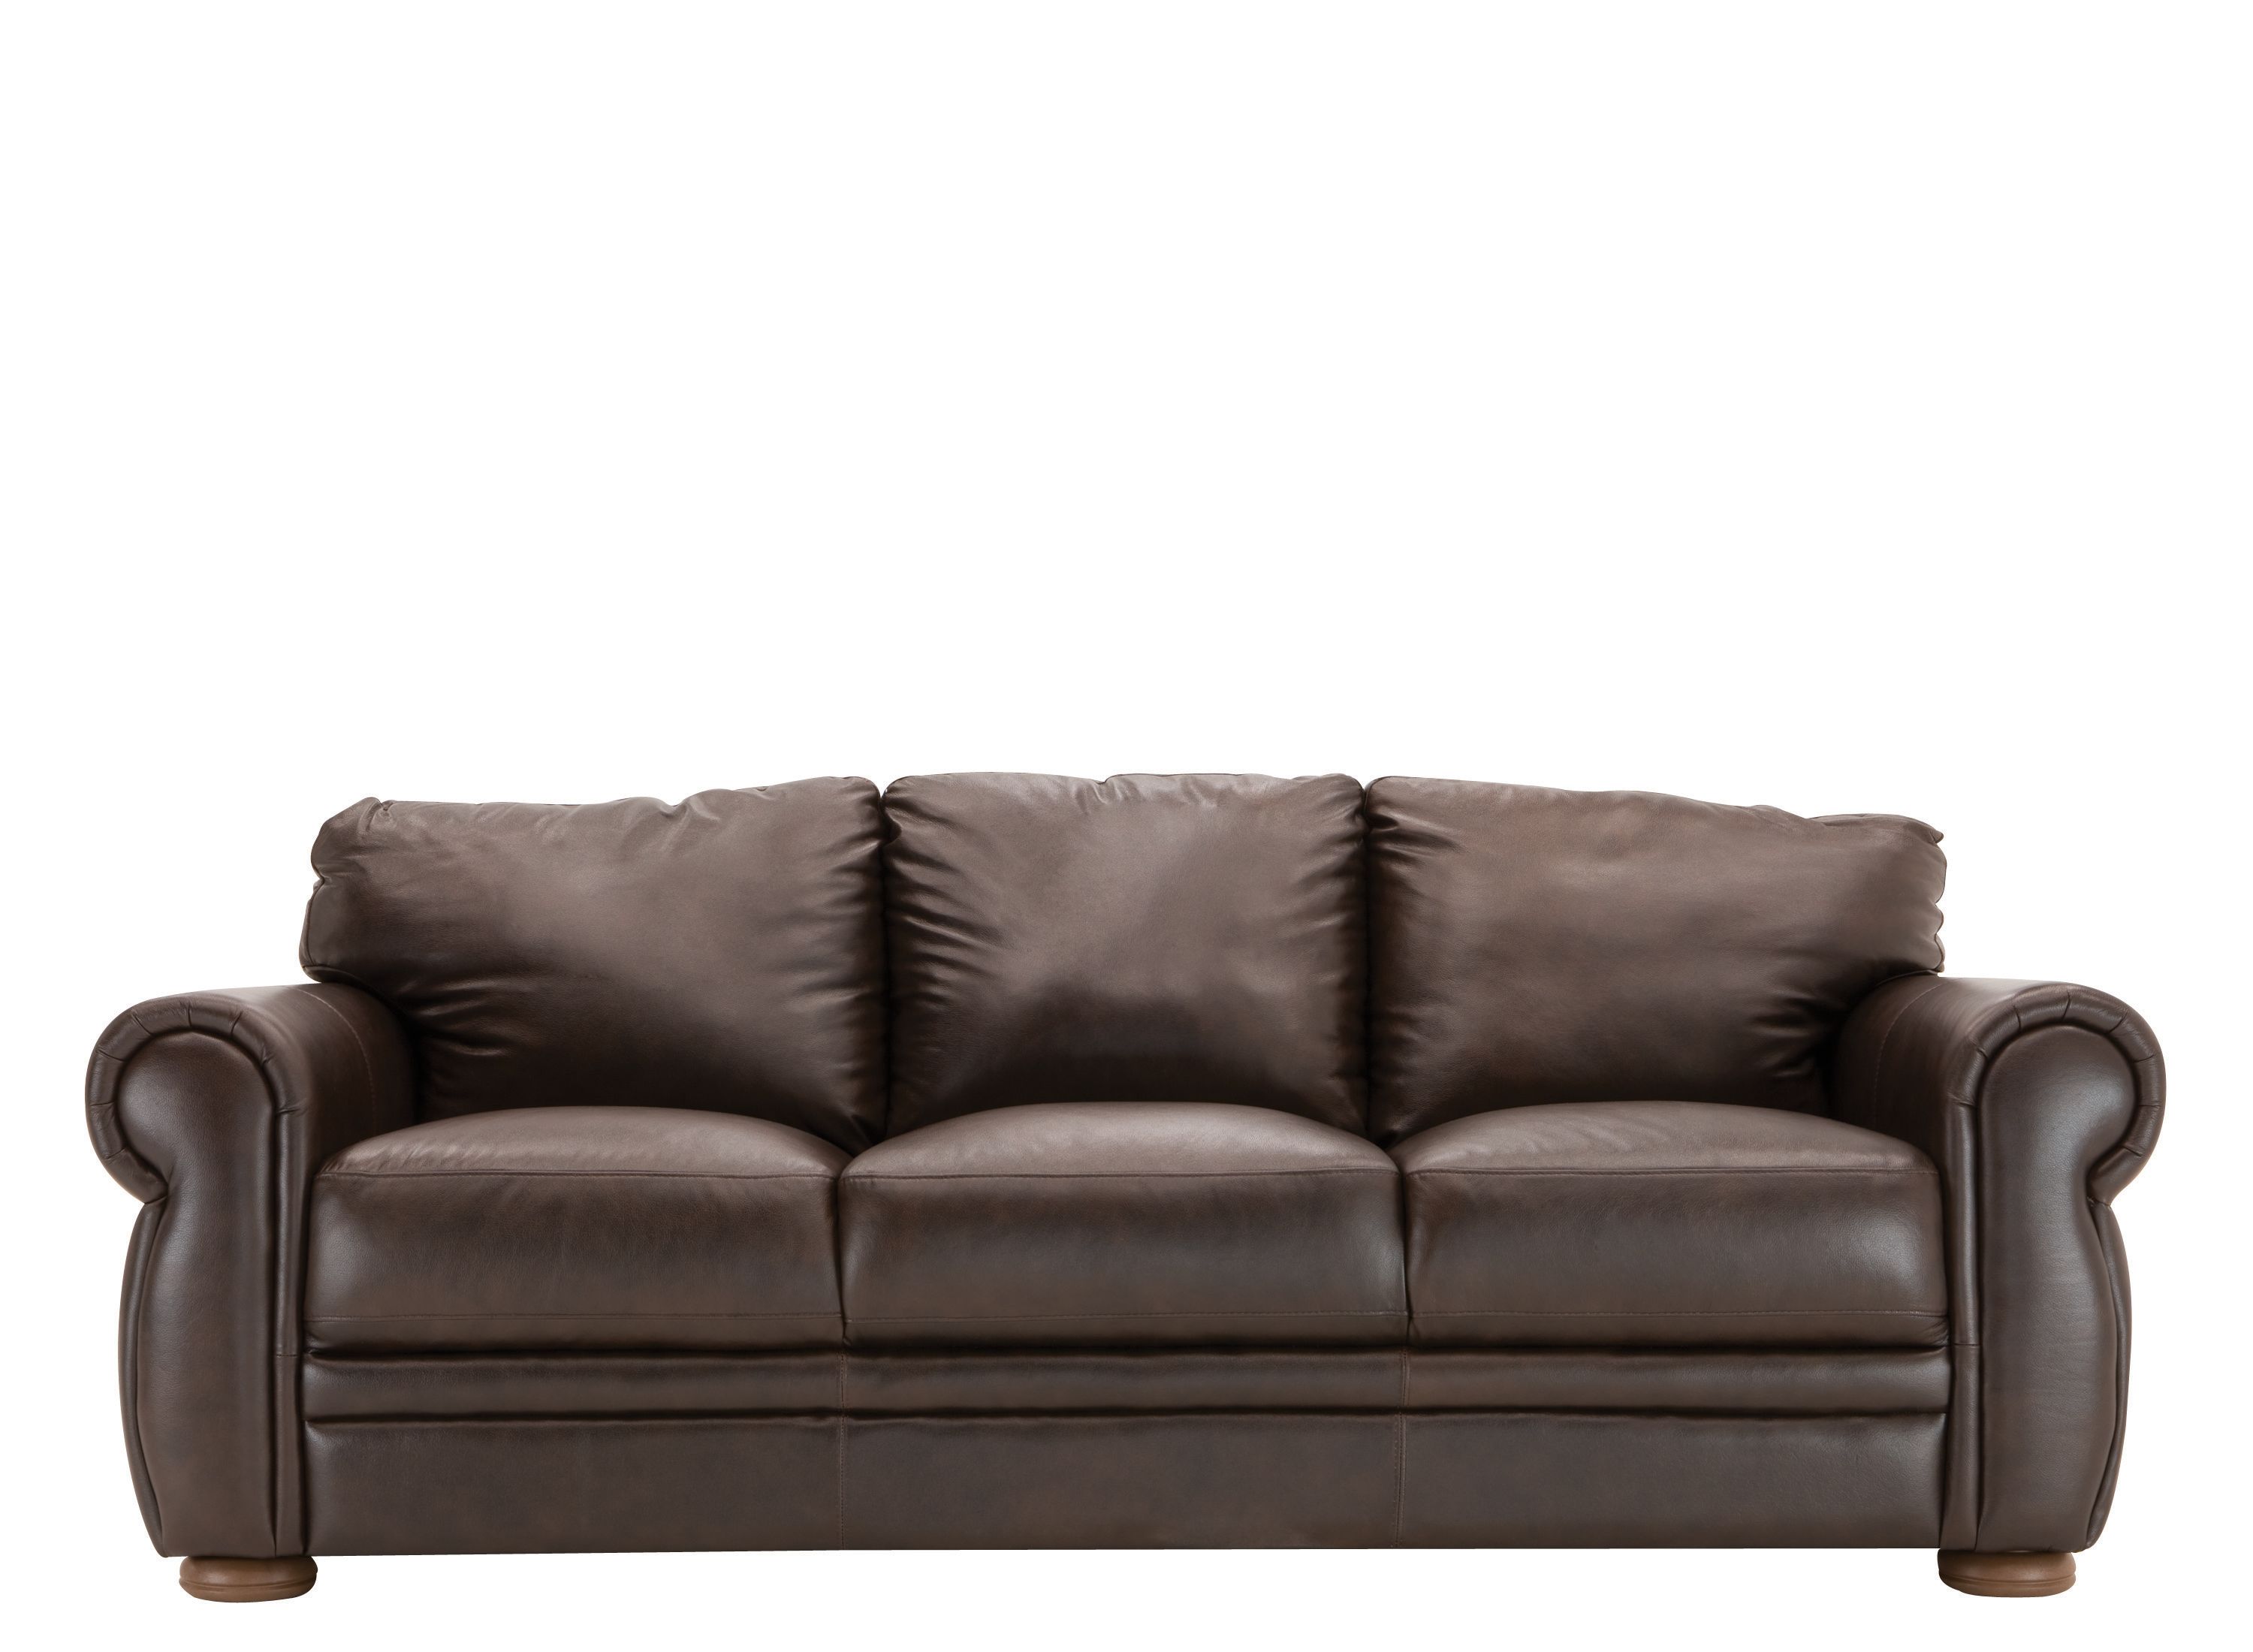 Leather Sofa Bed For Sale